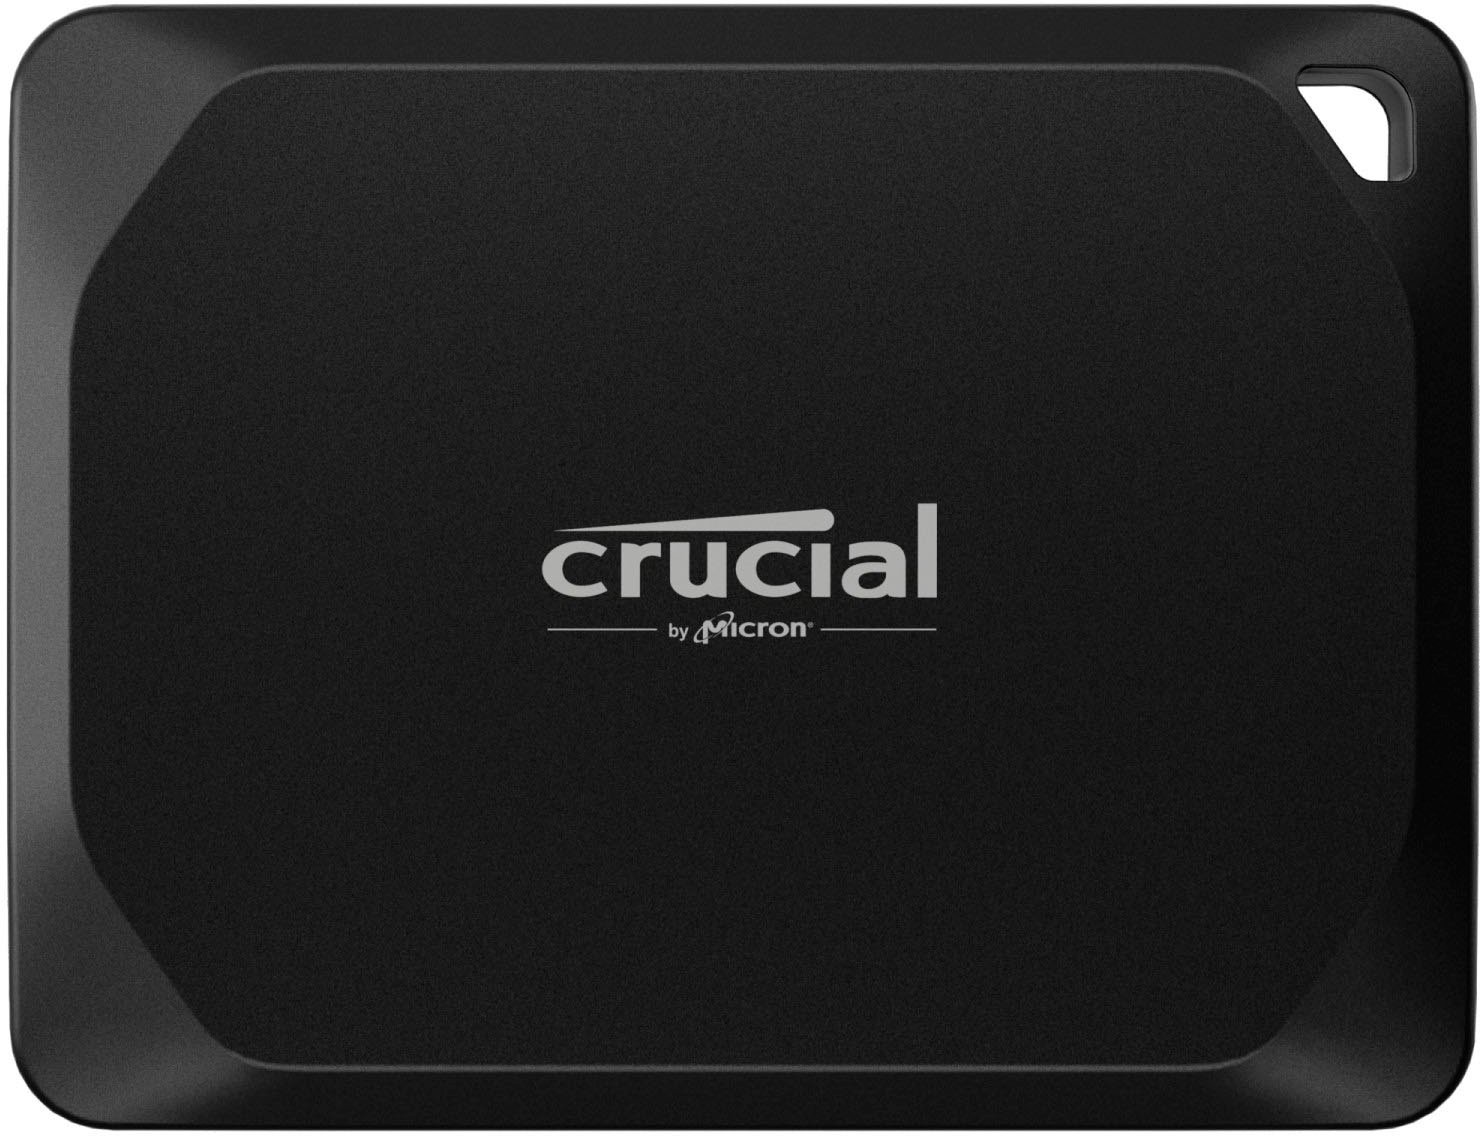 Crucial's new 2,100MB/s X9/X10 Pro portable SSDs now start from